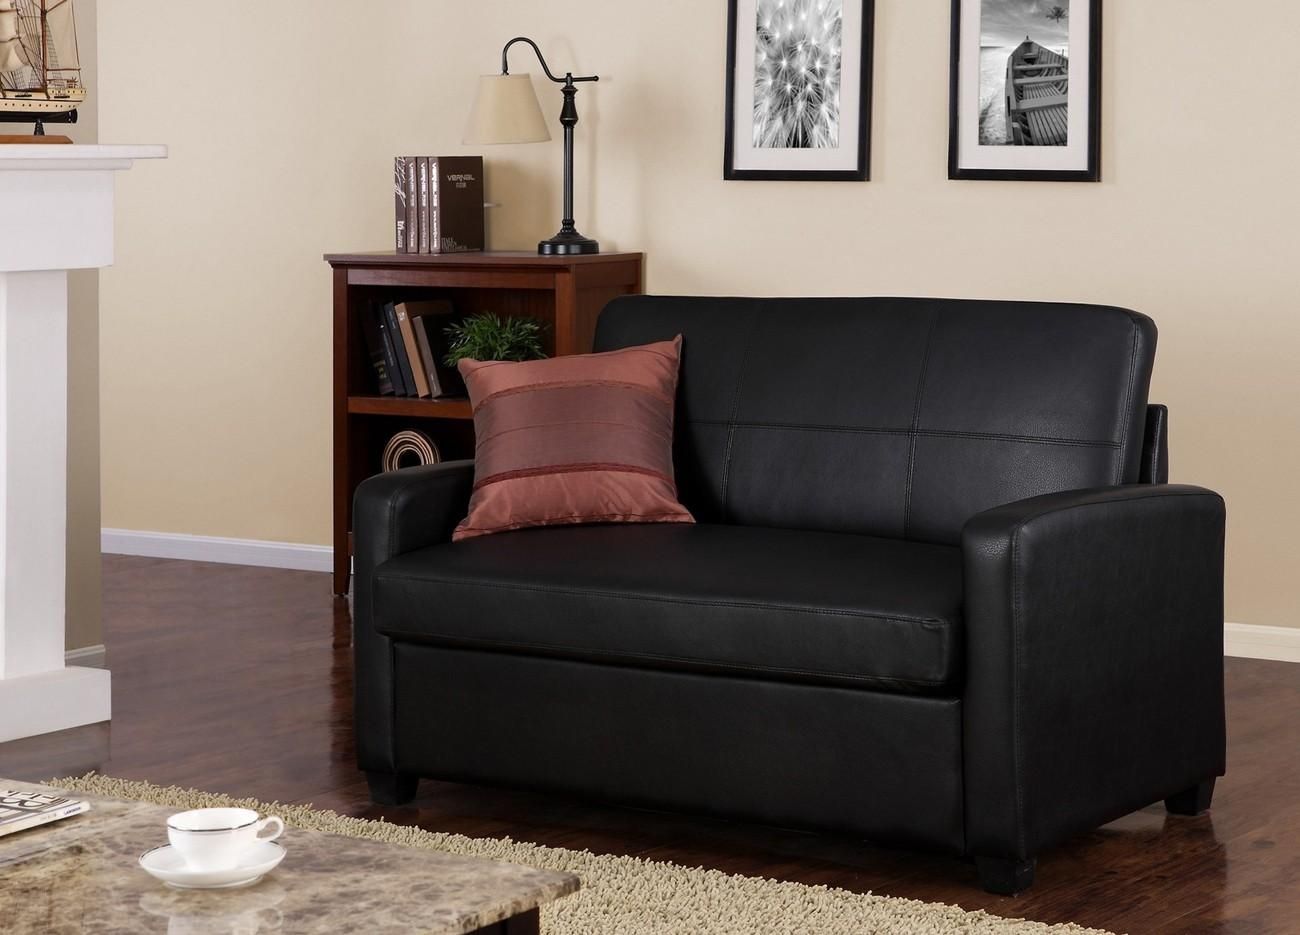 Mainstays | Black Faux Leather Sleeper Sofa With Regard To Faux Leather Sleeper Sofas (View 1 of 20)